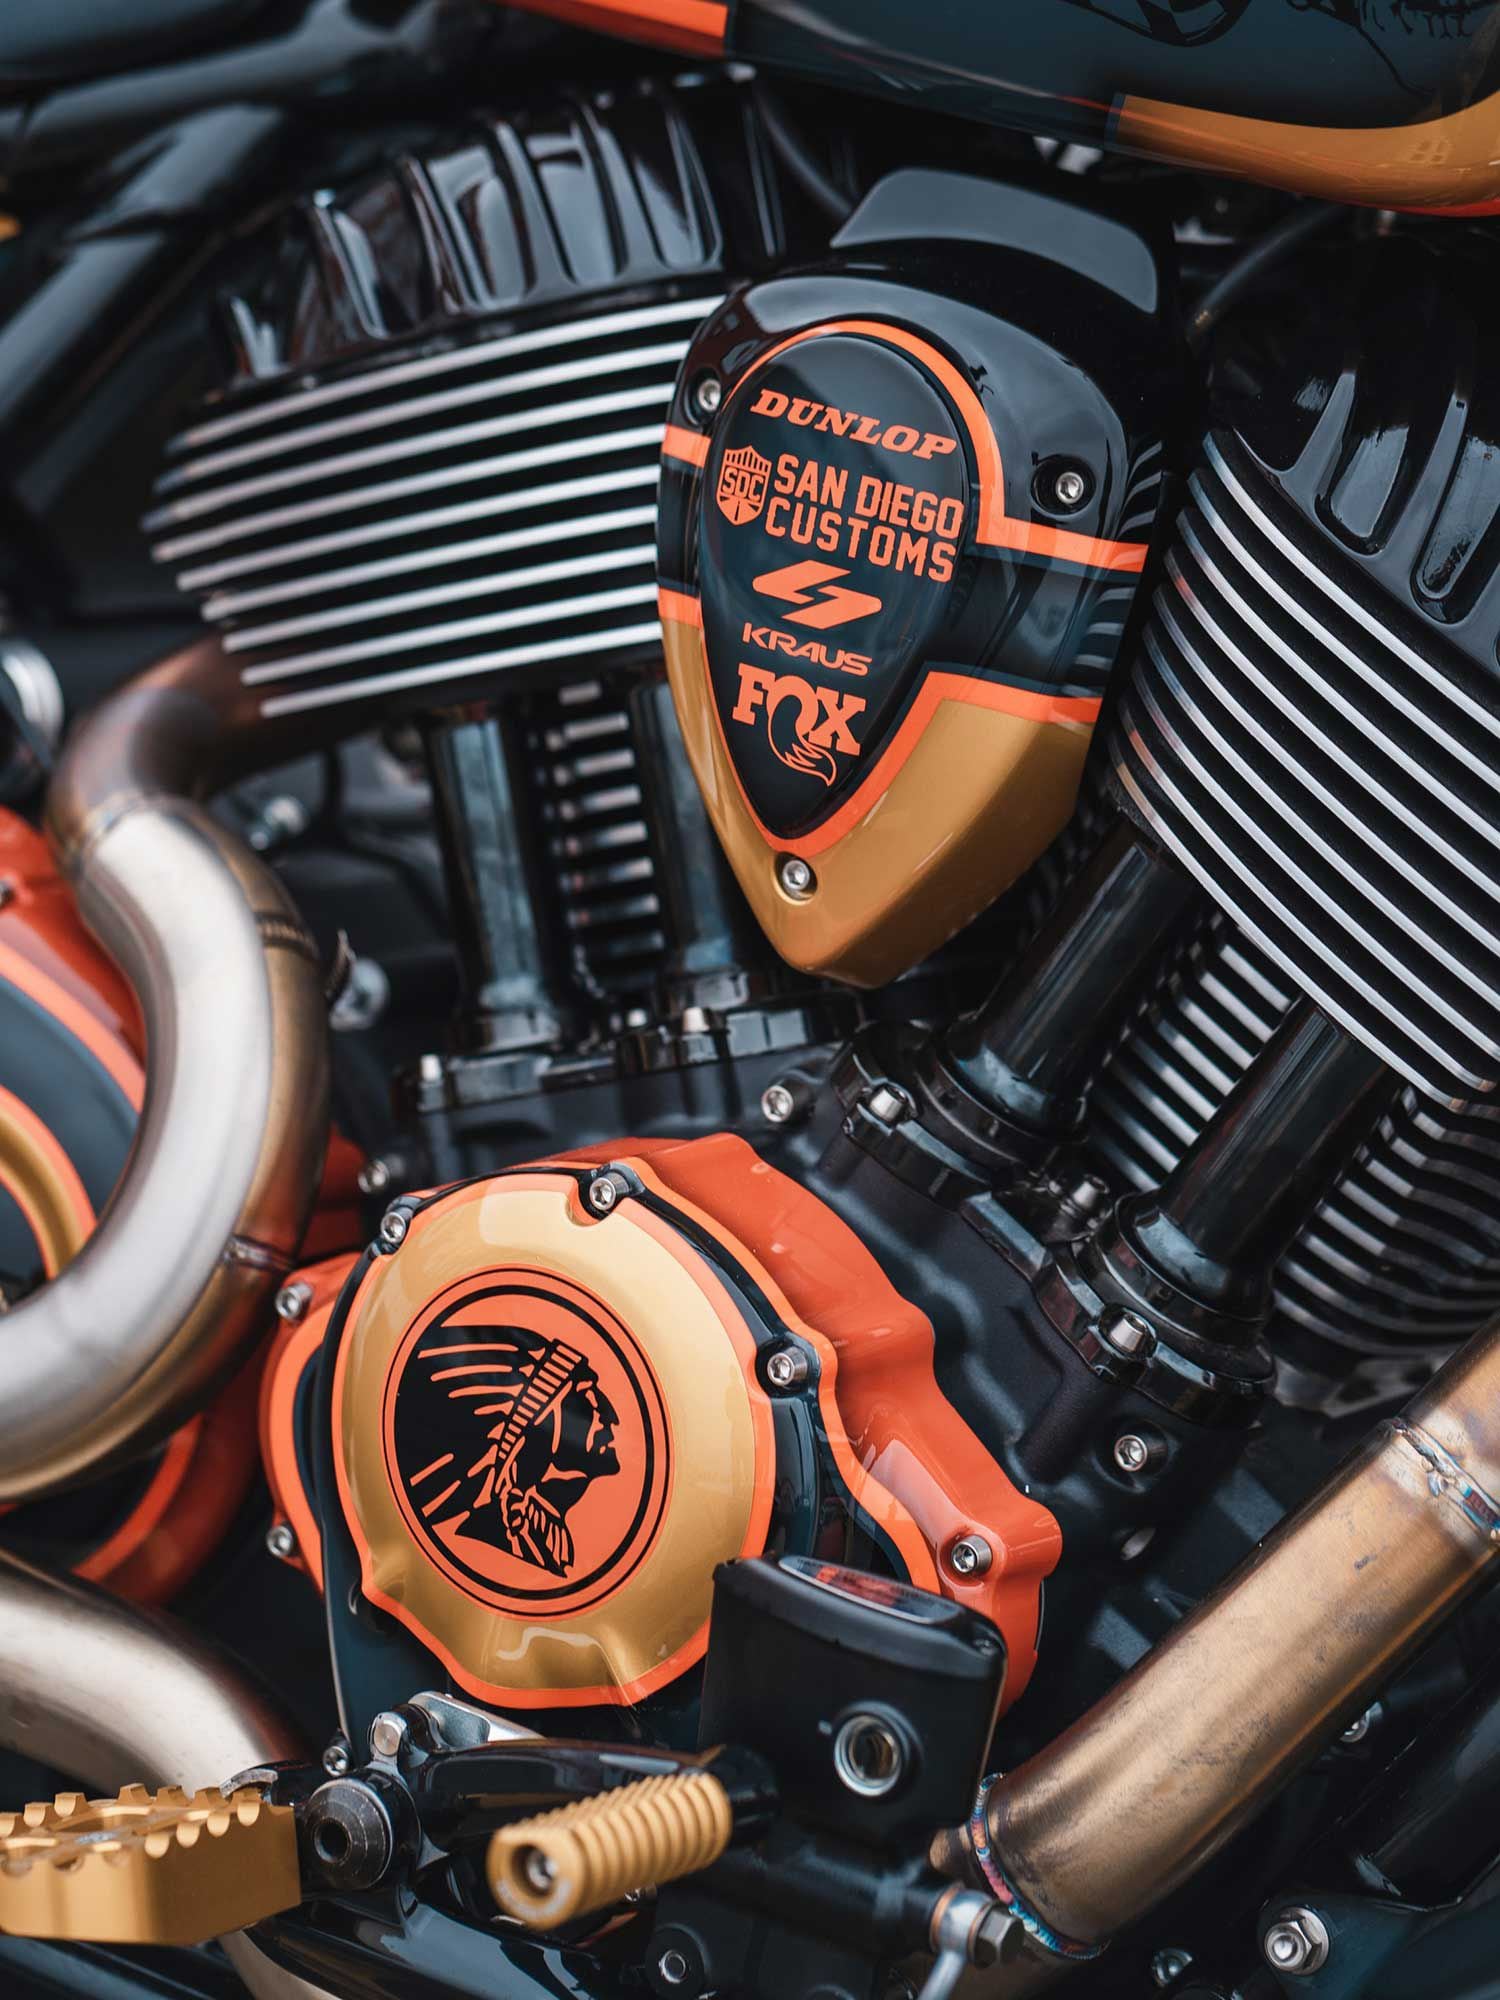 The Indian Chief Dark Horse version packs the higher-compression Thunder Stroke 116 engine which Hart accented with new covers and graphics, though no word on if he did any internal tinkering.